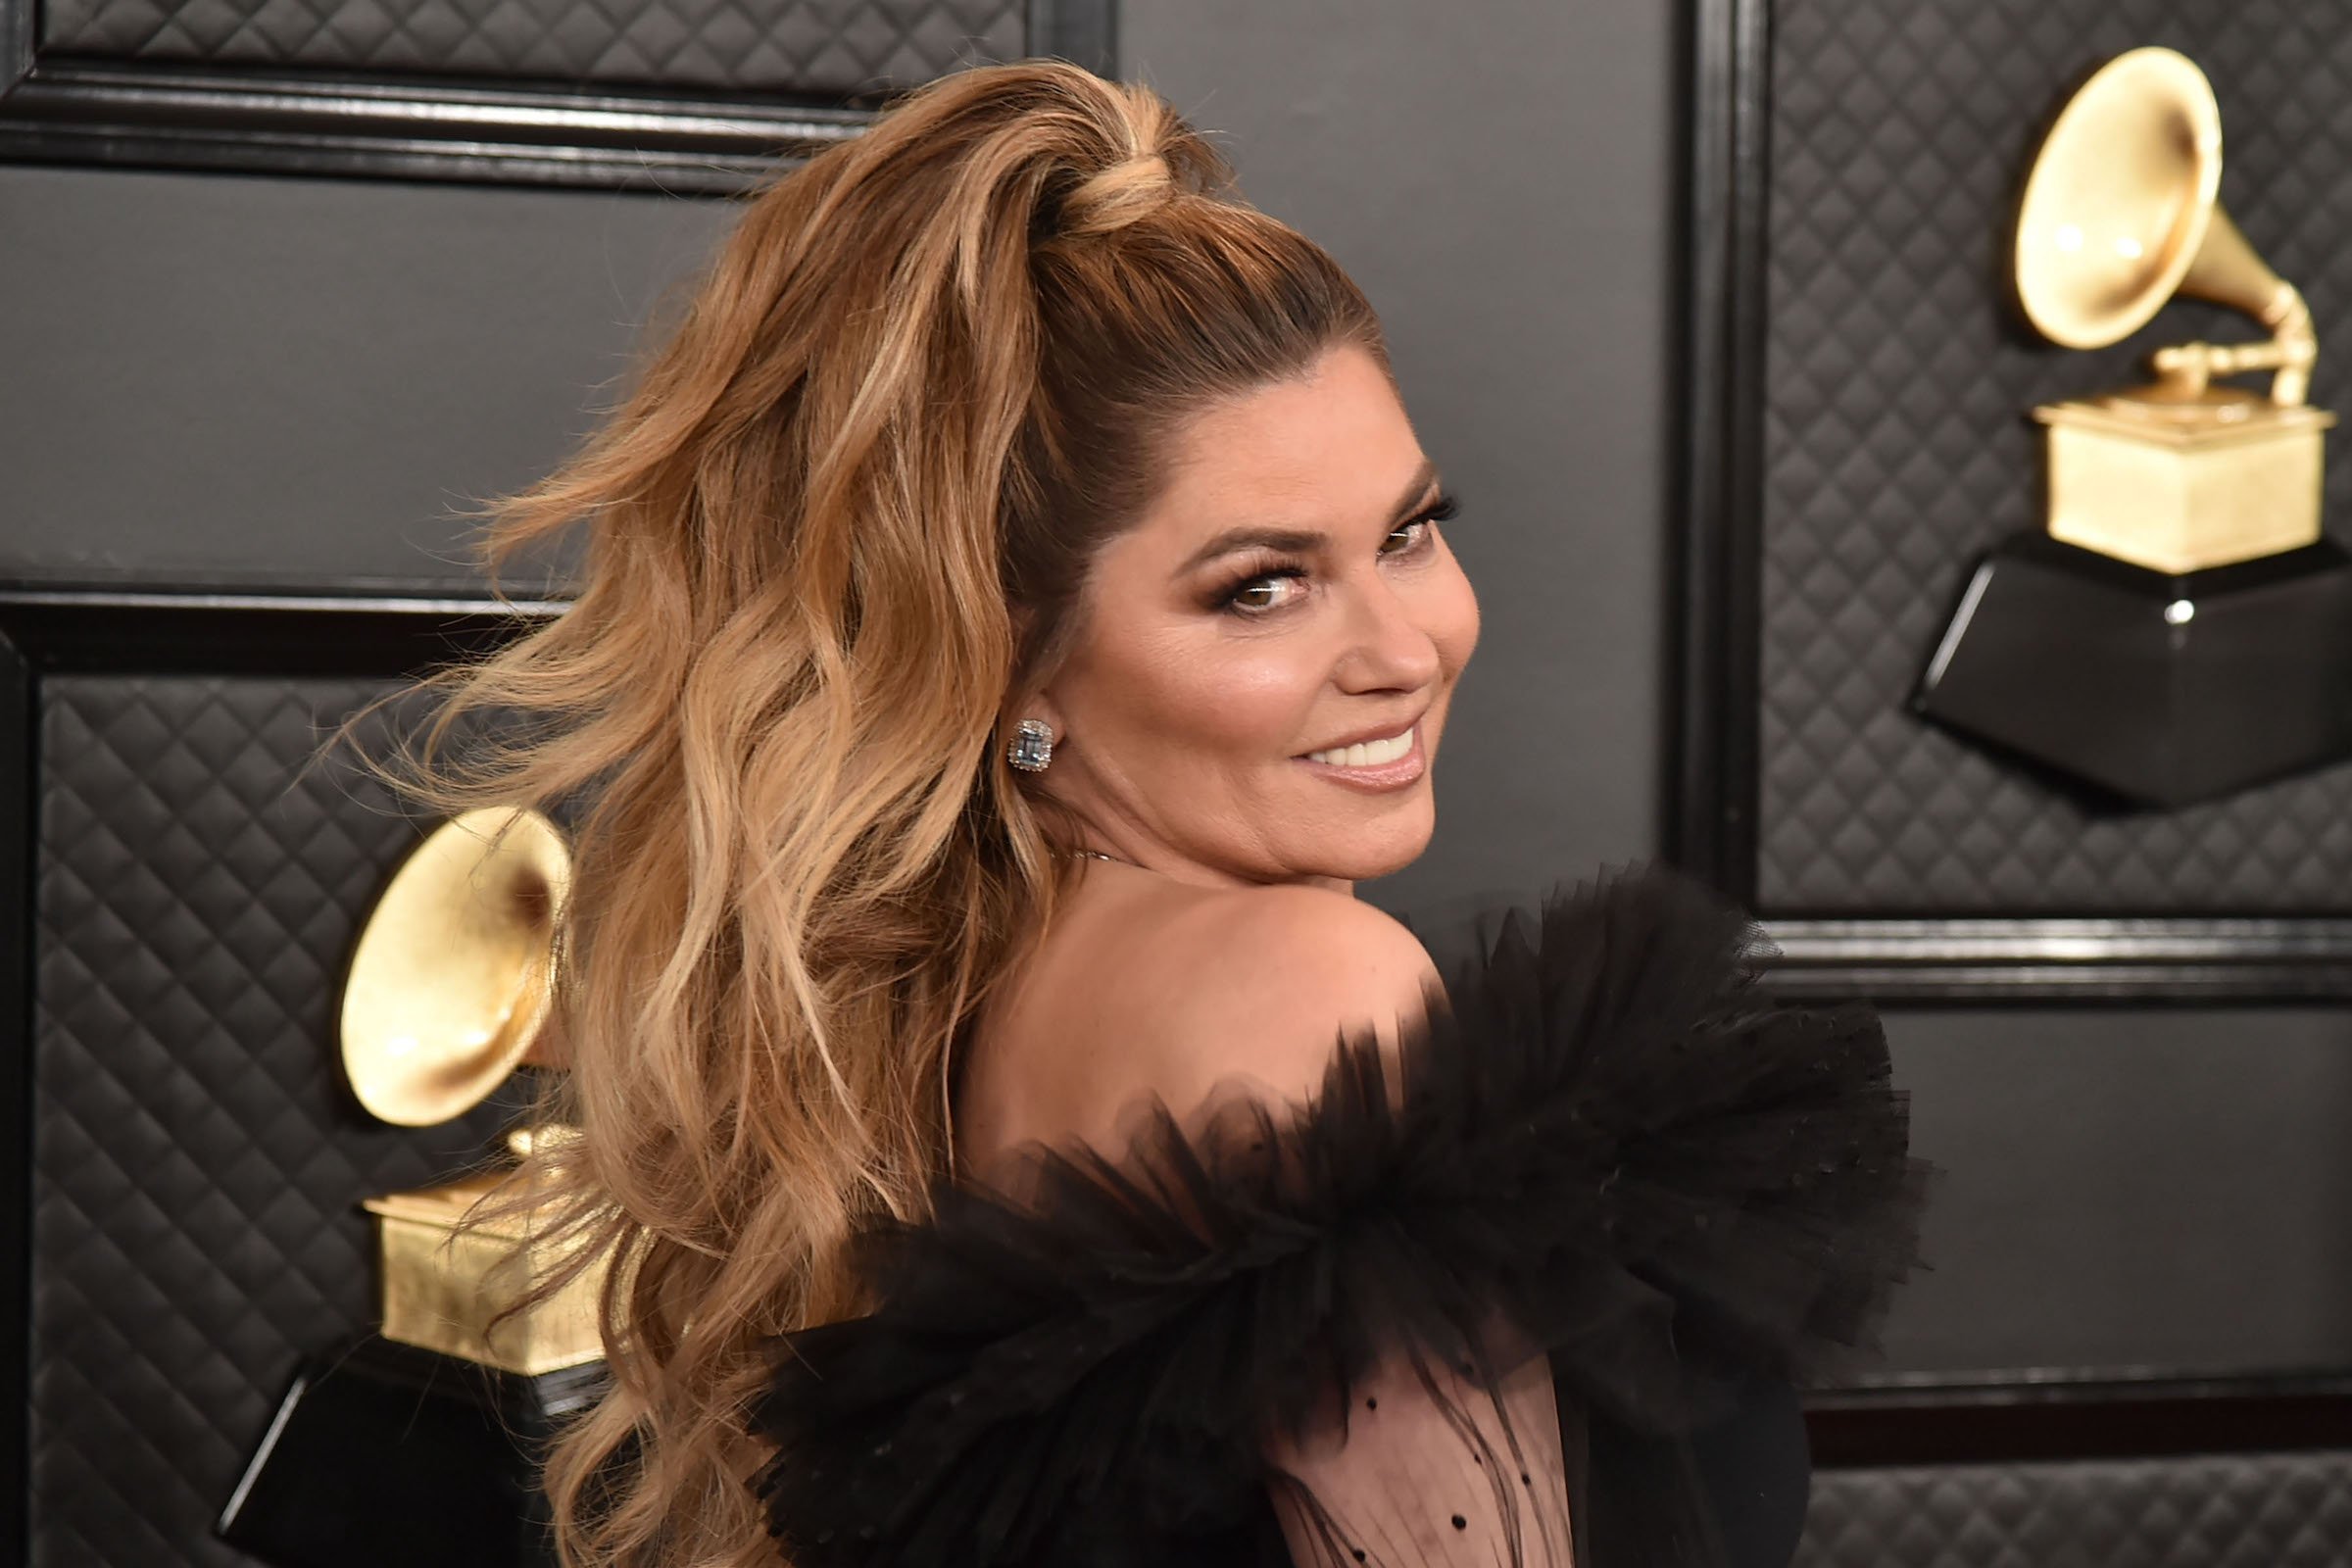 Shania Twain, who was inspired by drag queens to write one of her biggest hits, smiling for a photo at the Grammys wearing black